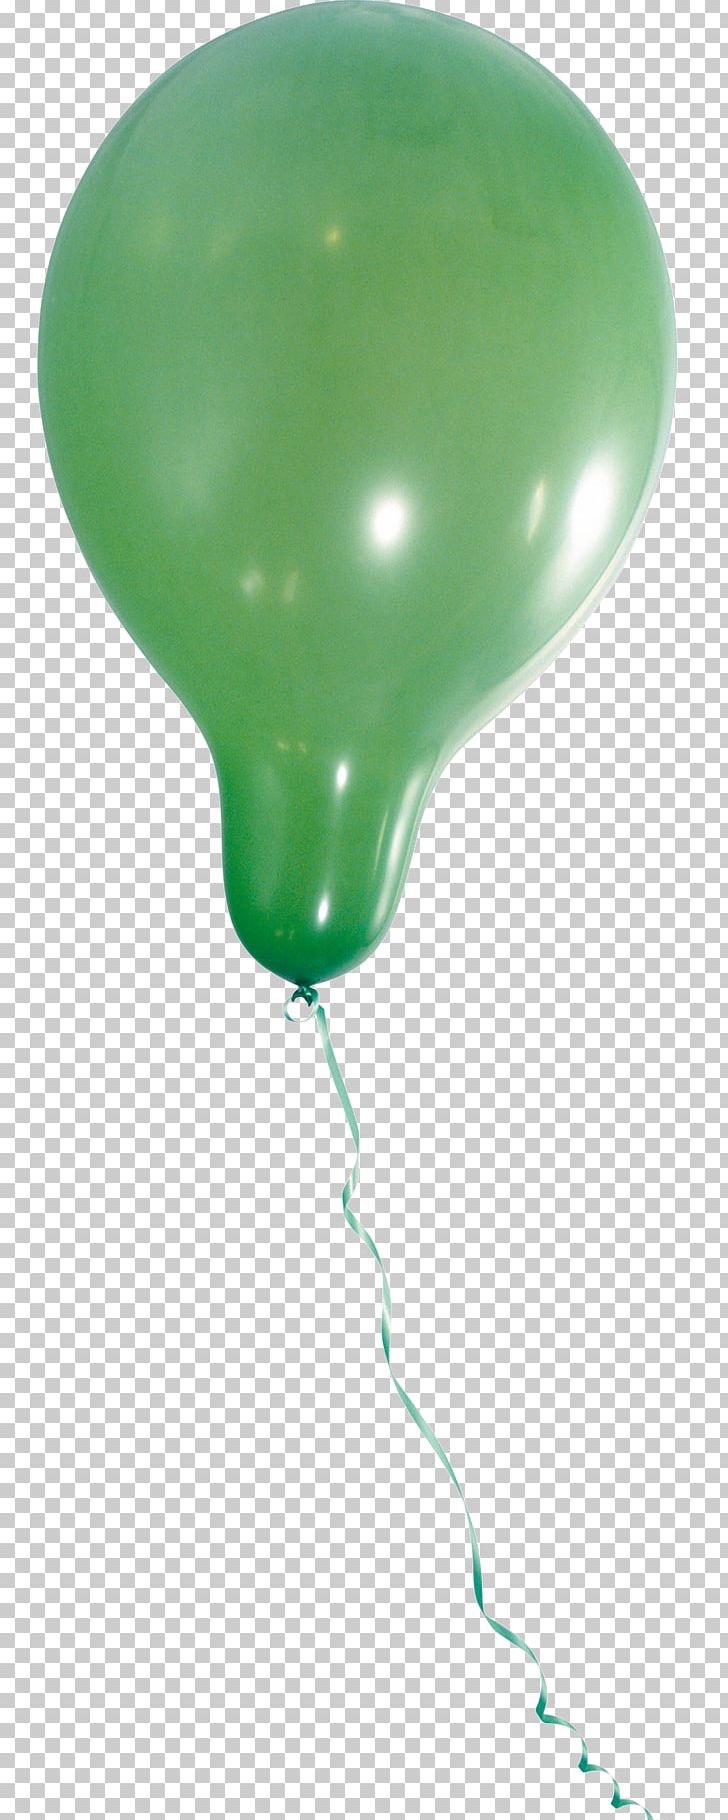 Toy Balloon Green Party PNG, Clipart, Balloon, Balloons, Green, Holidays, Objects Free PNG Download